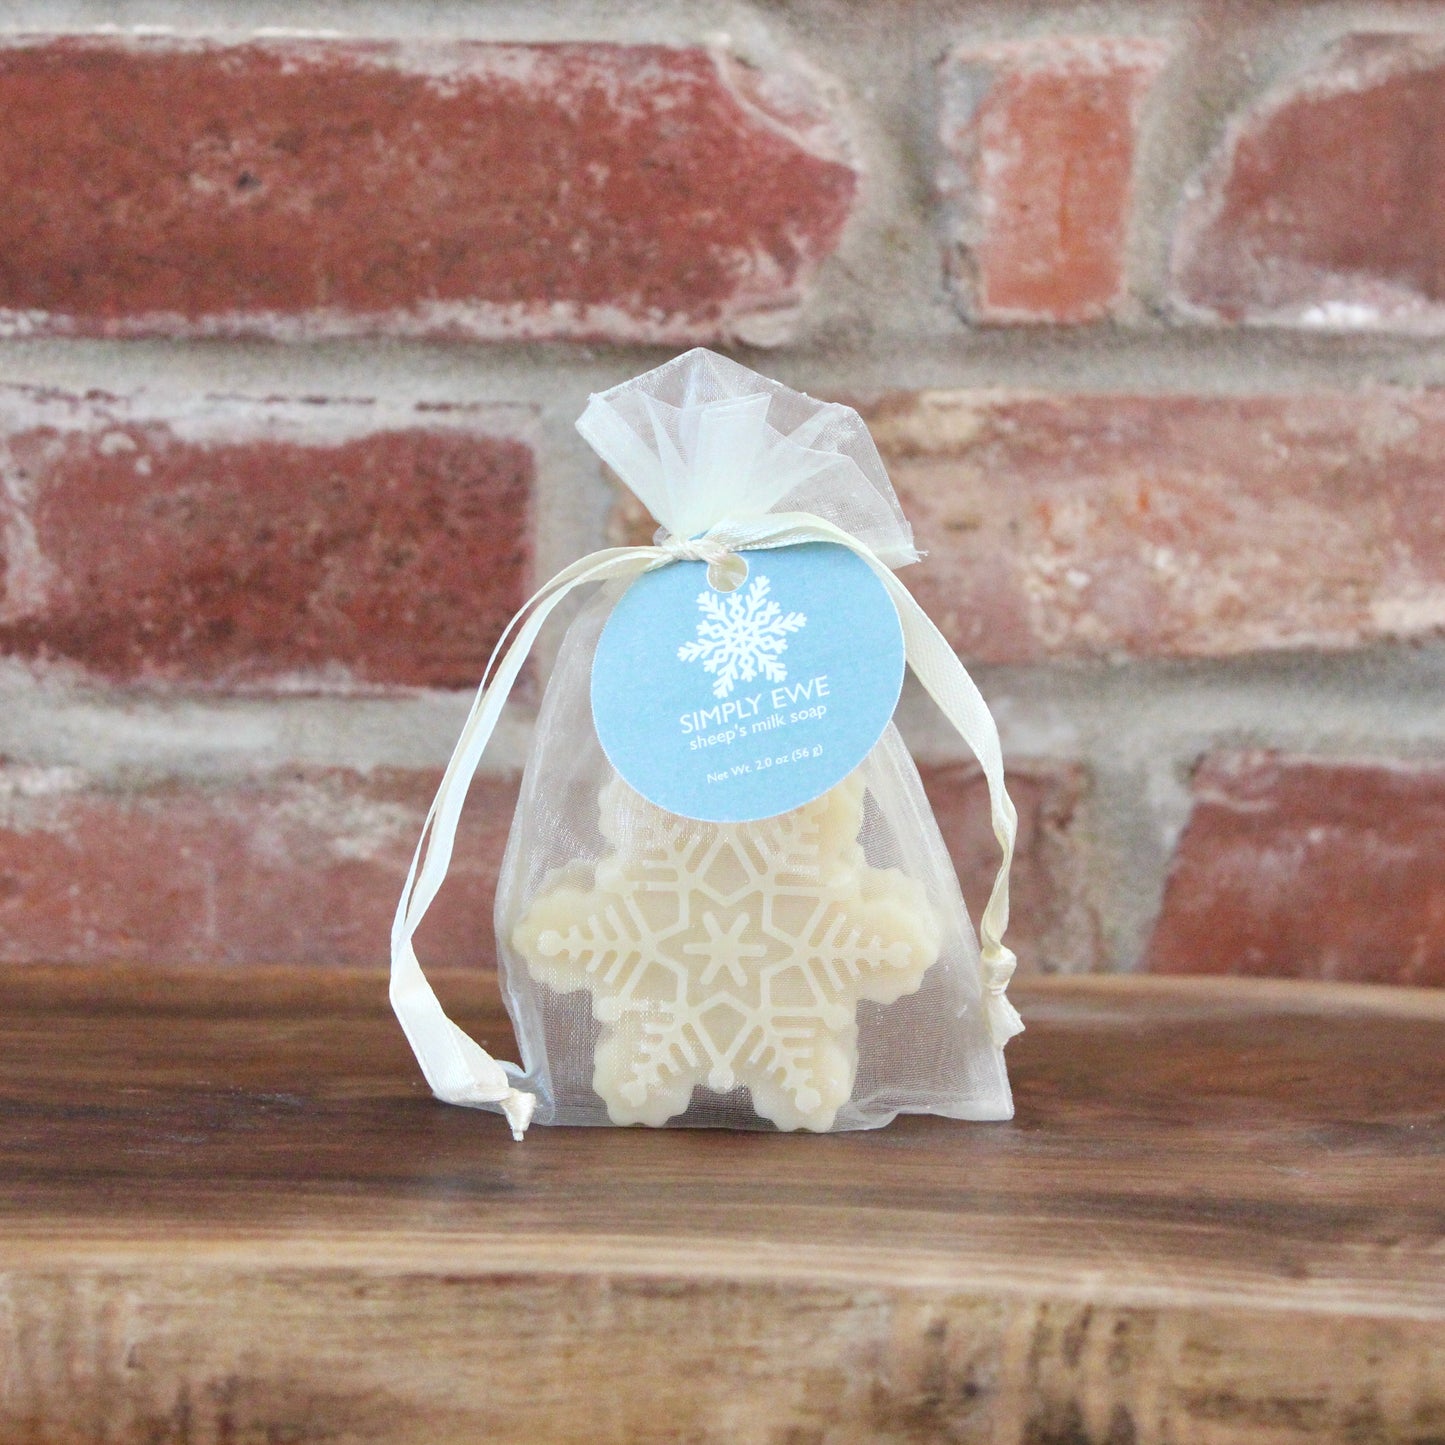 Snowflake-shaped Simply Ewe Sheep's Milk Soap on a wooden board with a brick background.